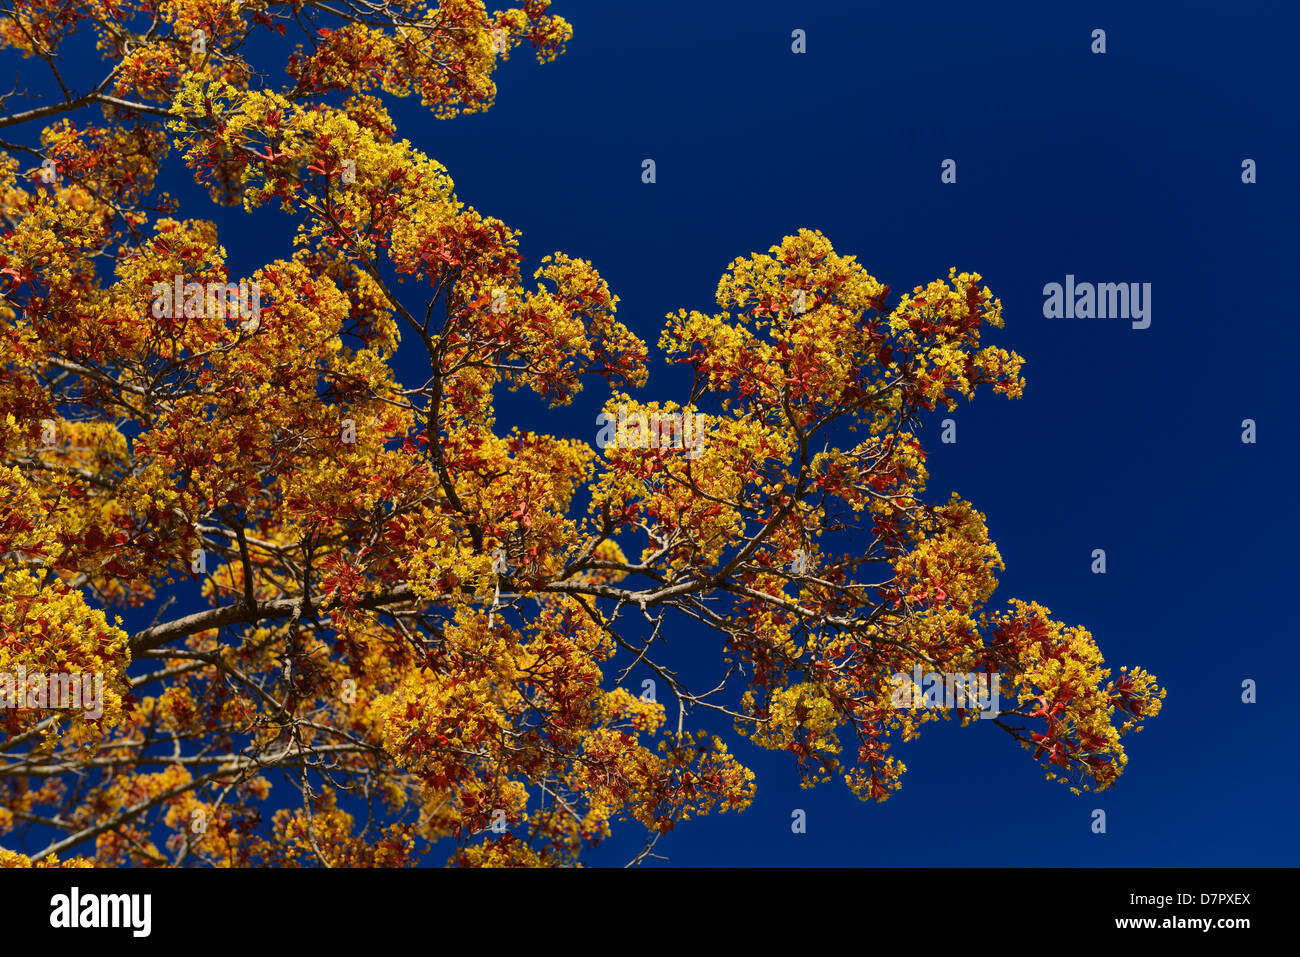 Branches of a Norway Maple tree cultivar Crimson King with orange flowers in Spring Toronto Canada against a clear blue sky Stock Photo